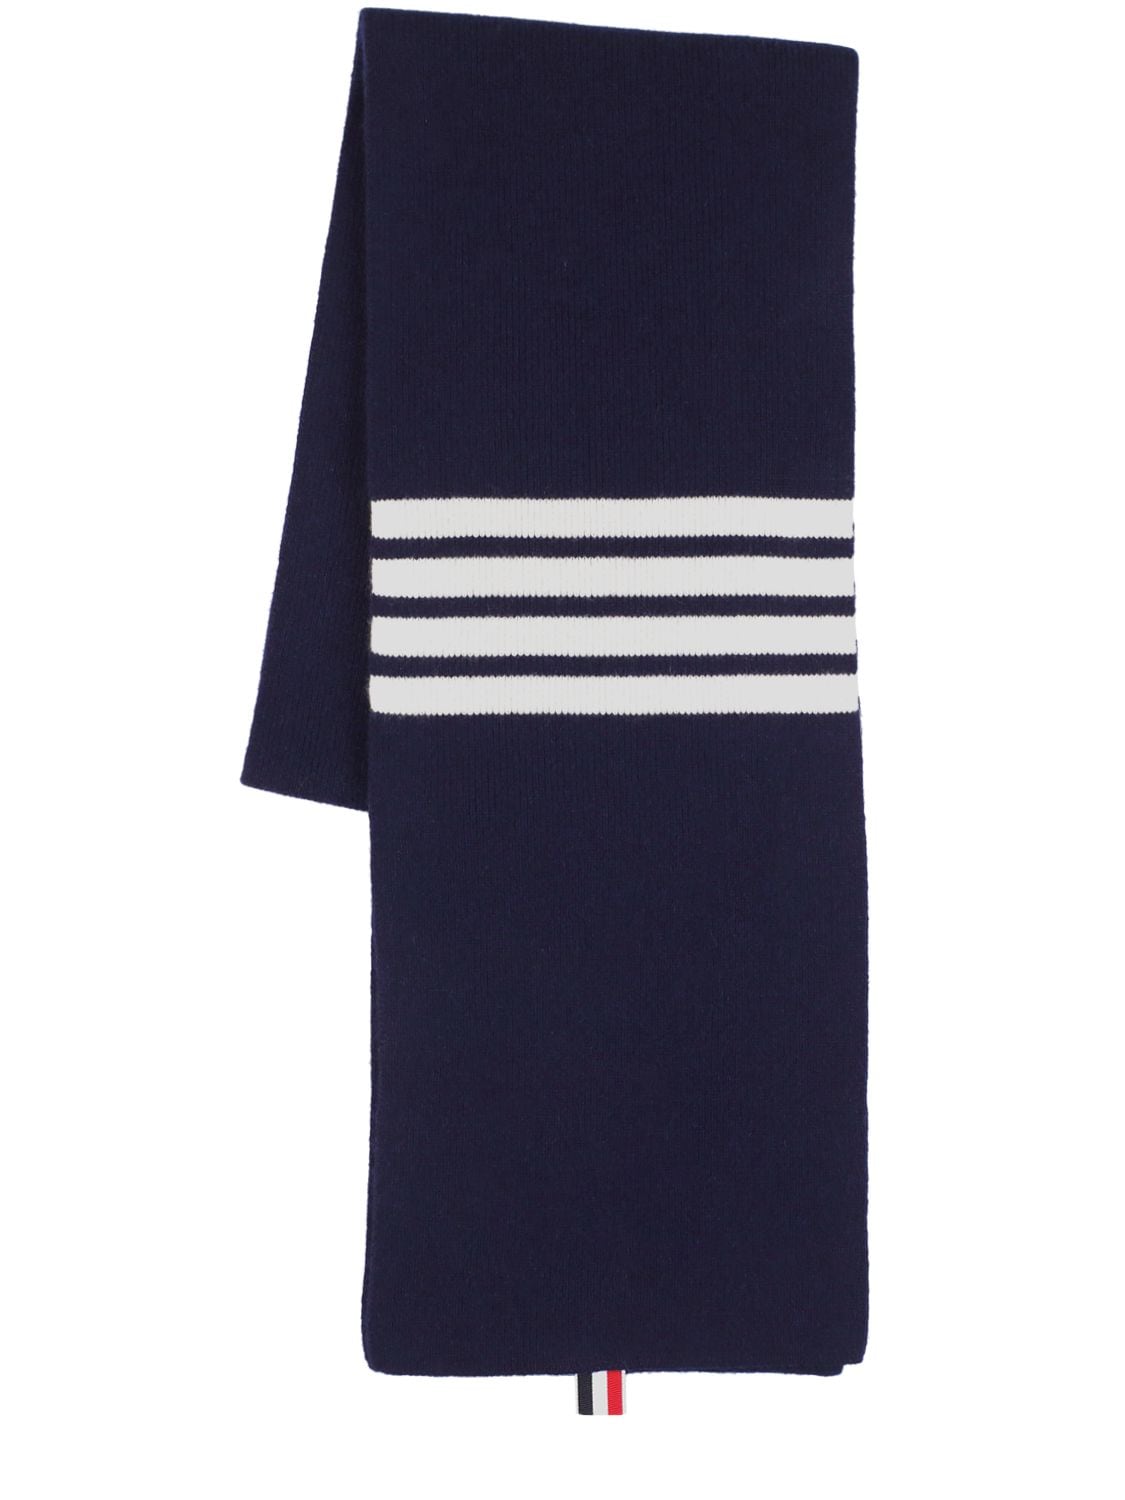 THOM BROWNE RUBBED CASHMERE SCARF